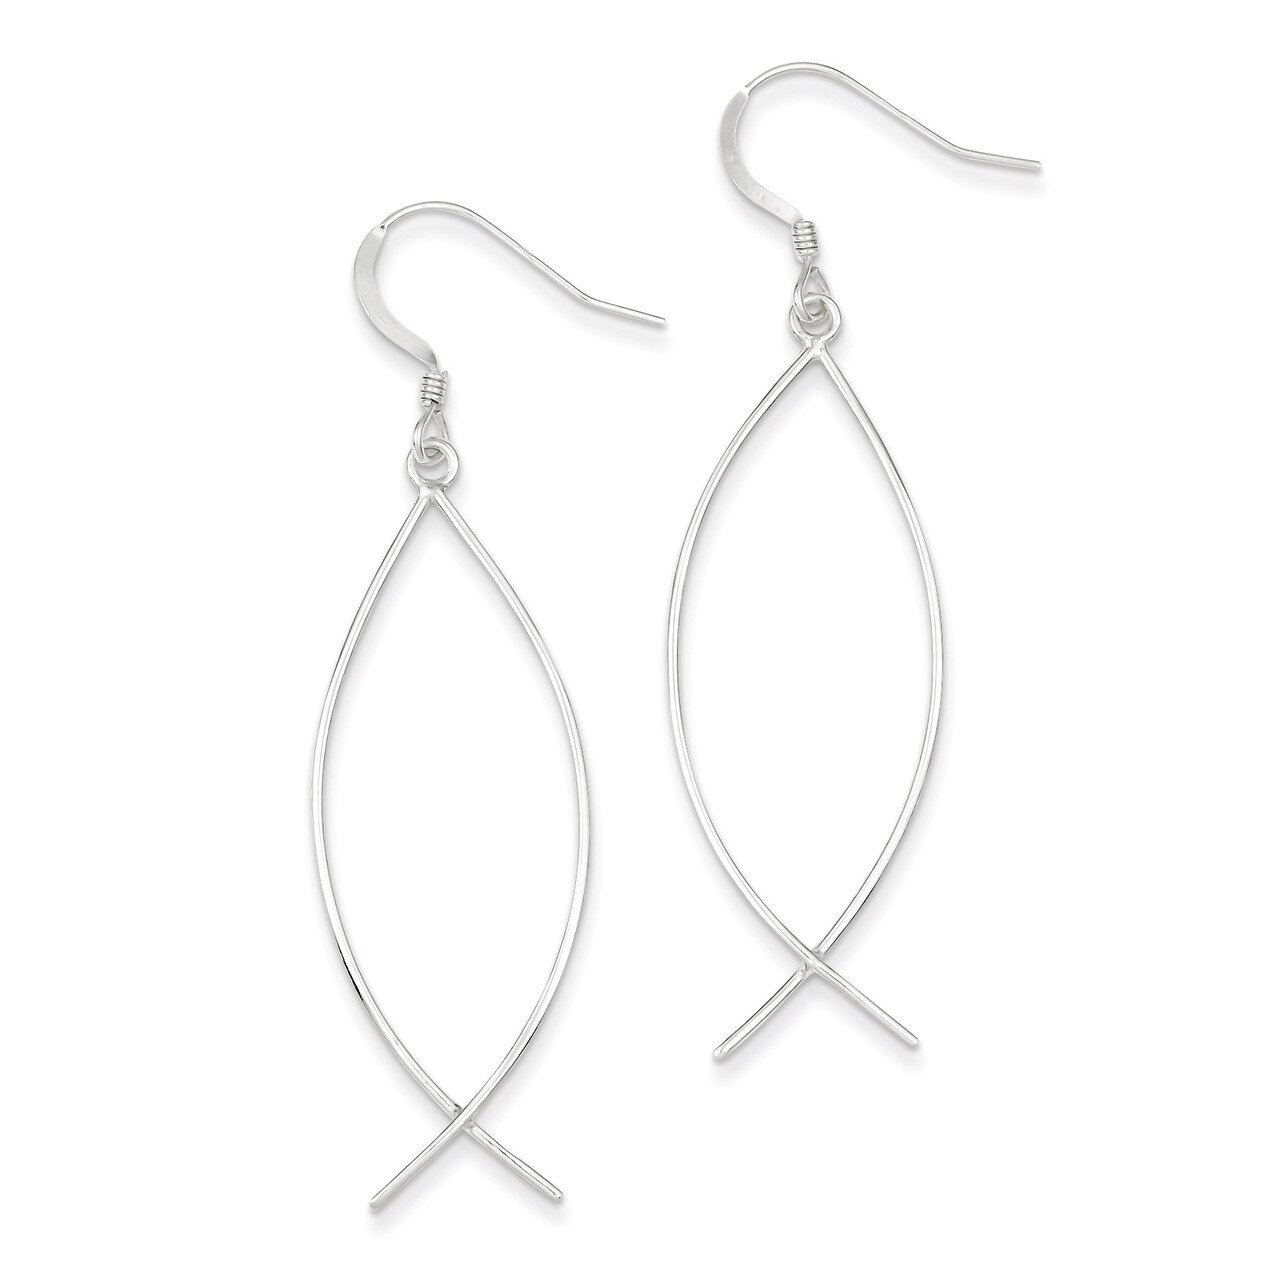 Ichthus (fish) Earrings Sterling Silver QE4790